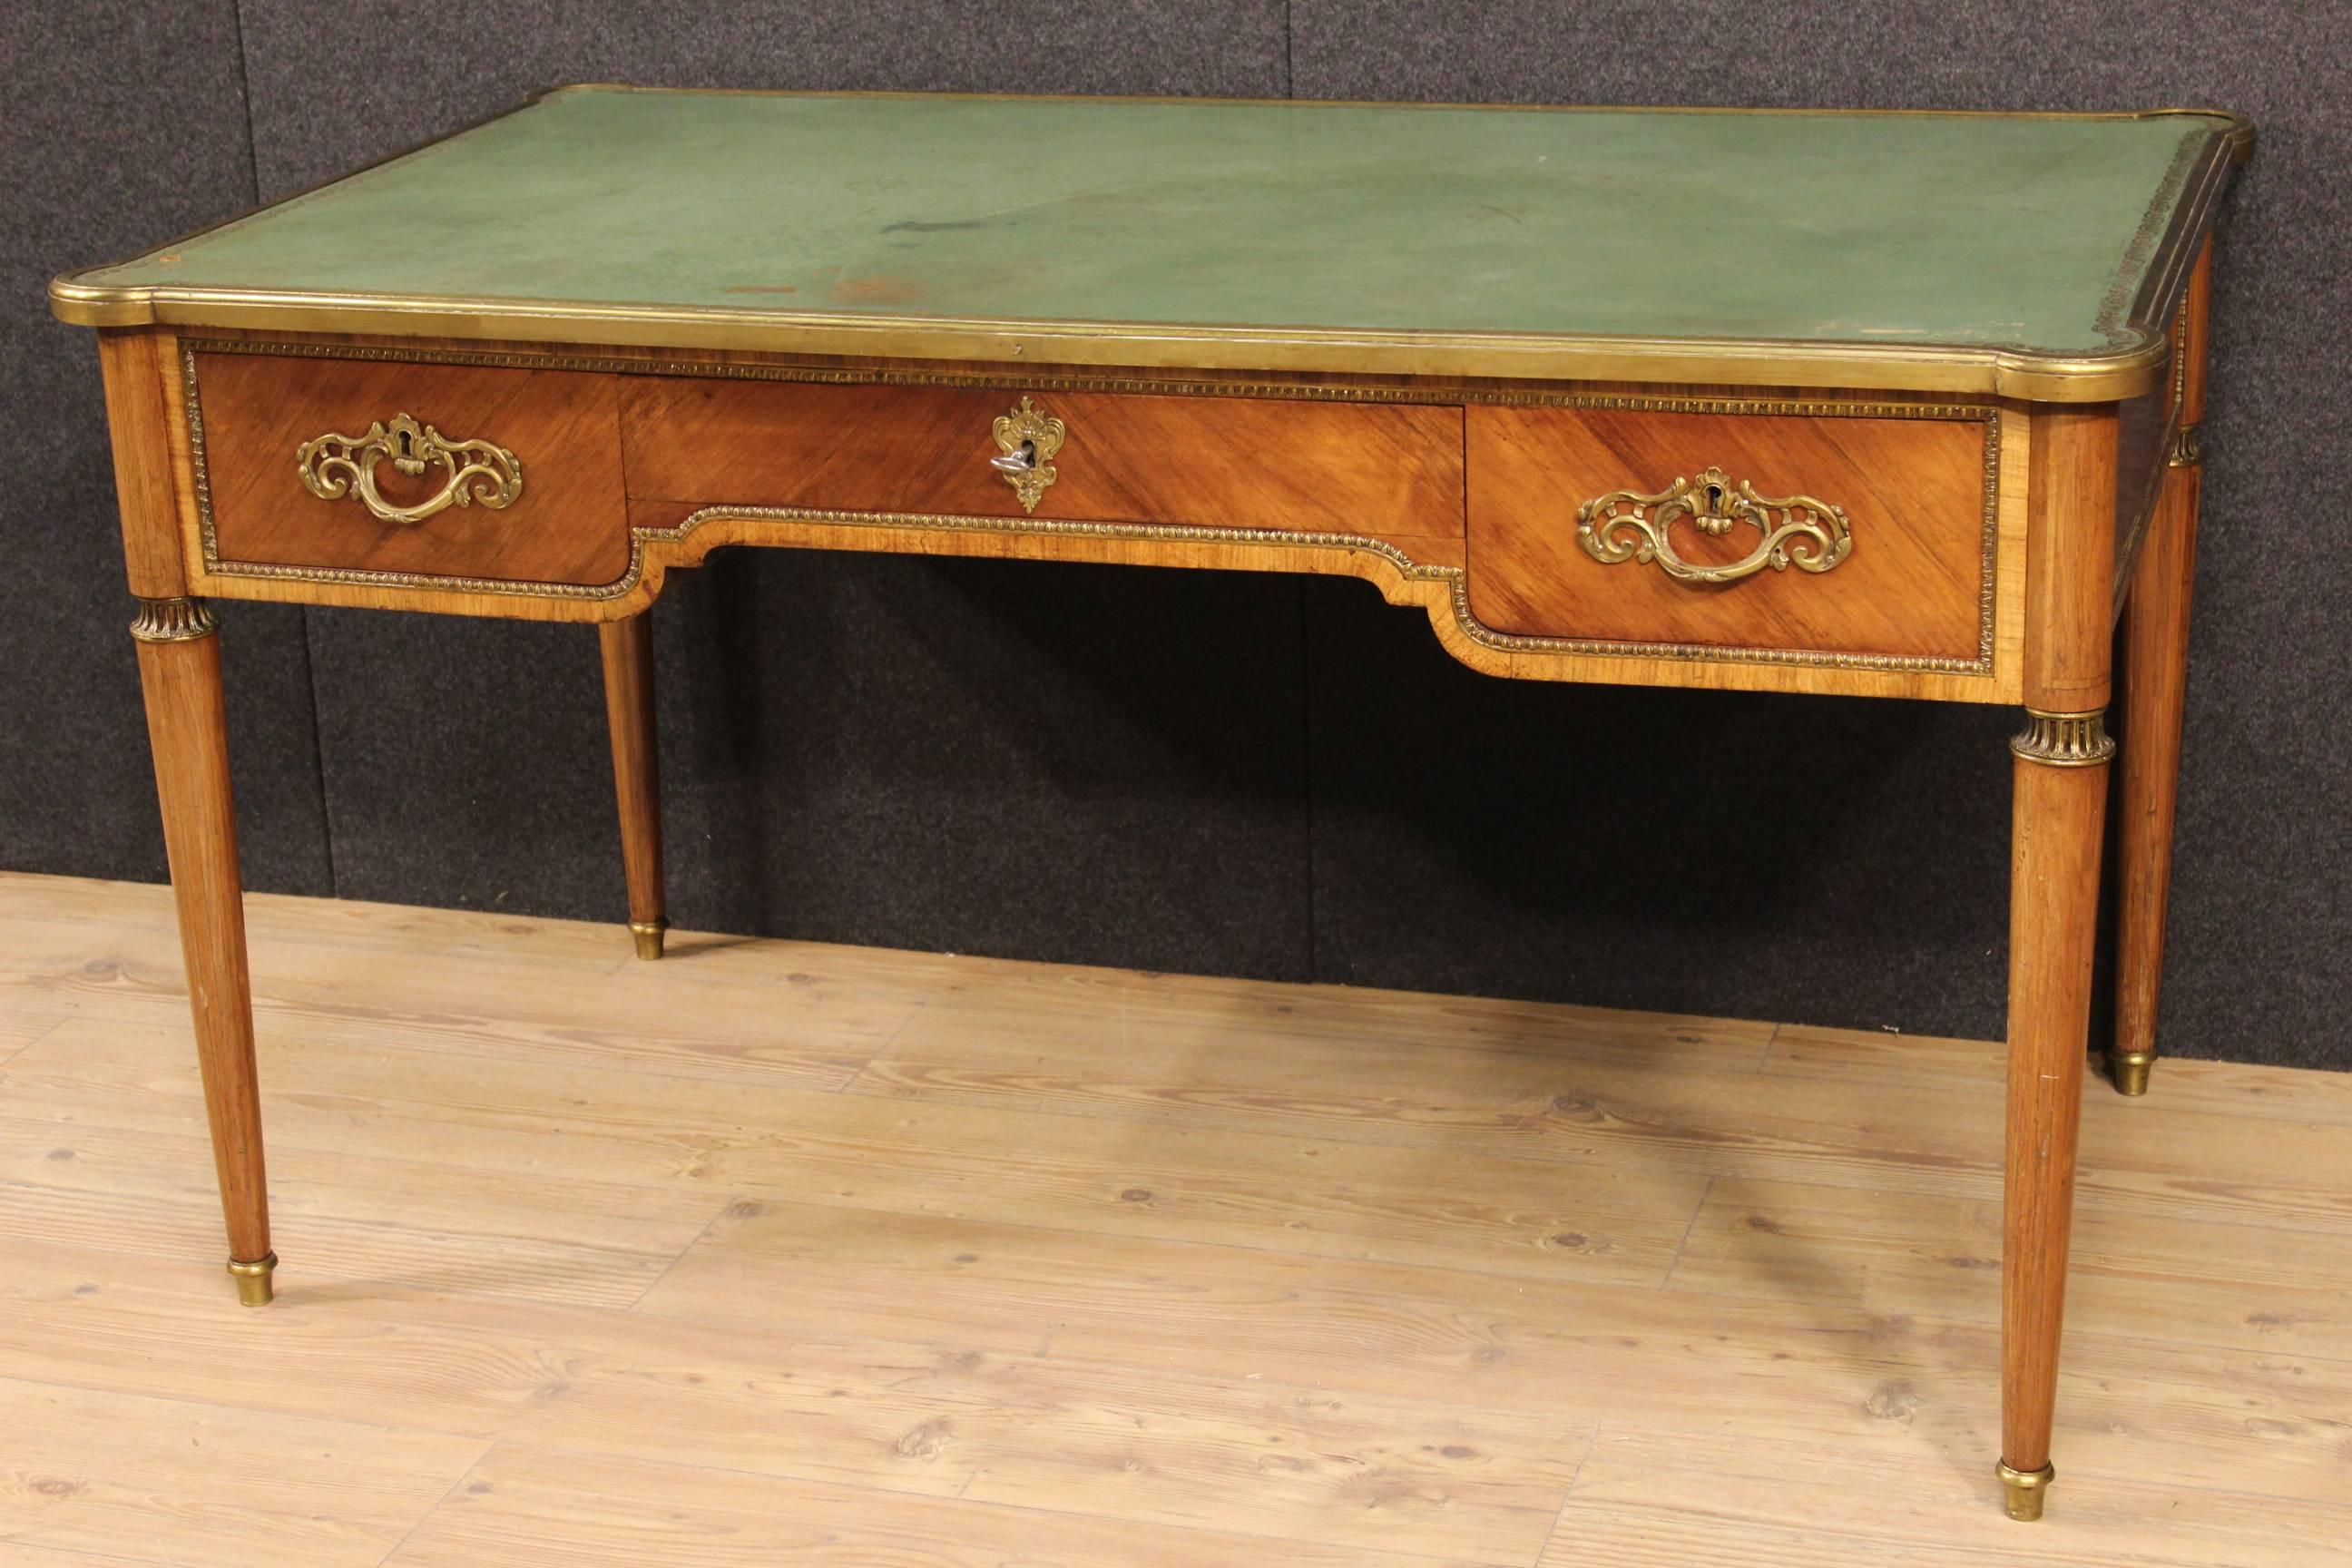 English desk of the late 19th century. Furniture veneered and inlaid in rosewood and palisander, of beautiful line and good taste. Desk finely decorated with bronzes, finished for the center with three frontal drawers of good capacity. Top not